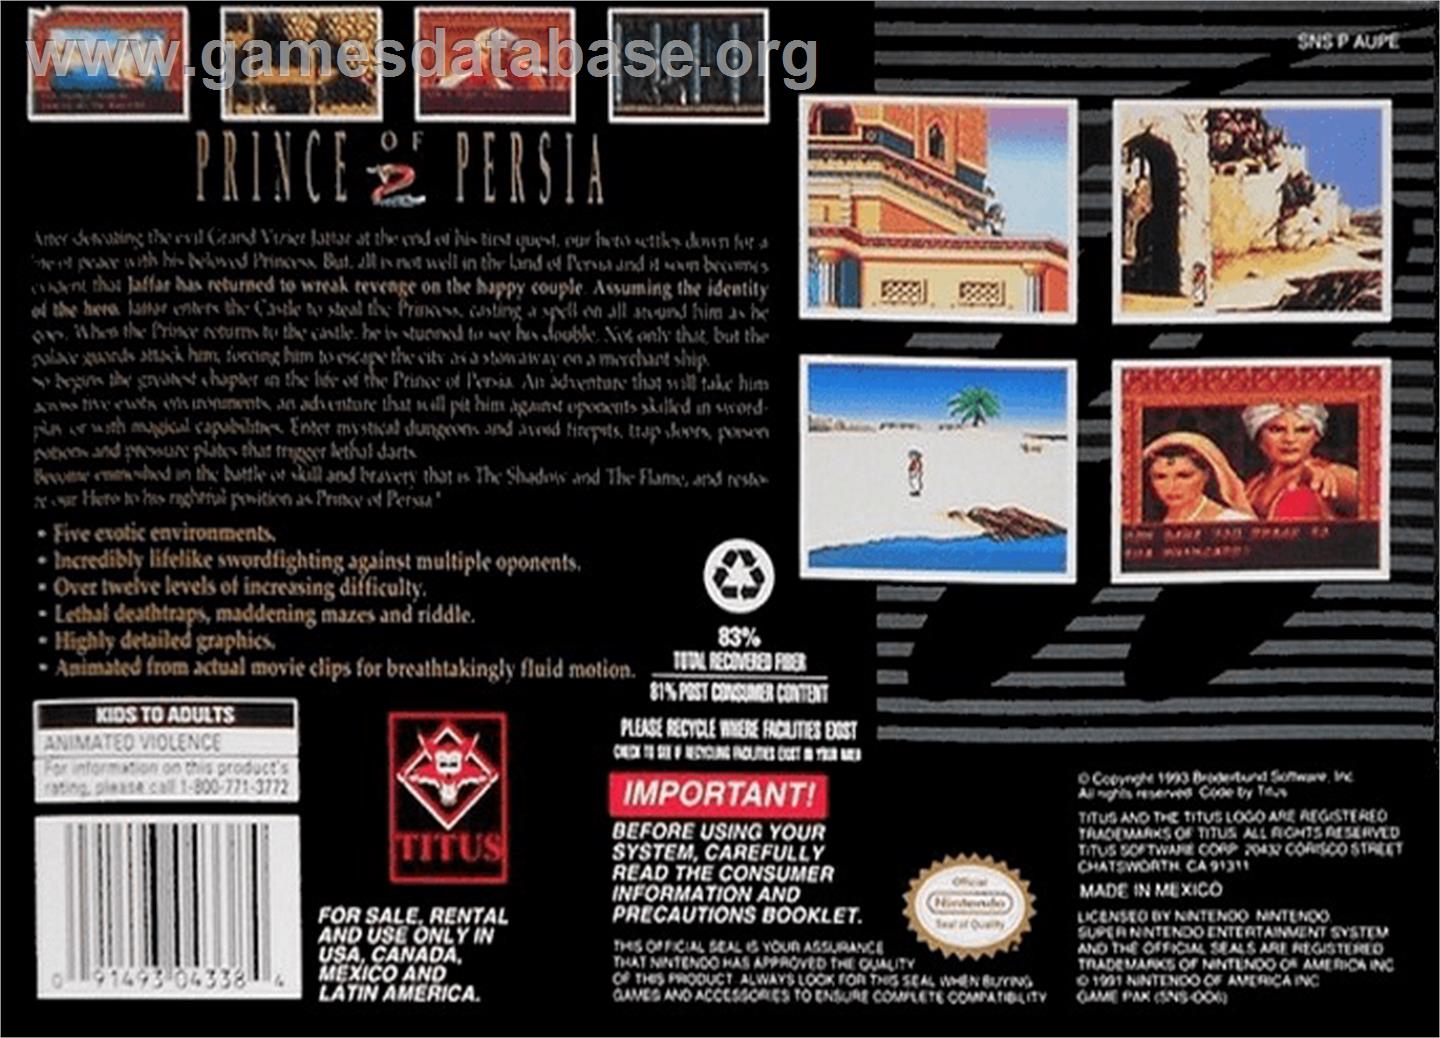 Prince of Persia 2: The Shadow & The Flame - Nintendo SNES - Artwork - Box Back